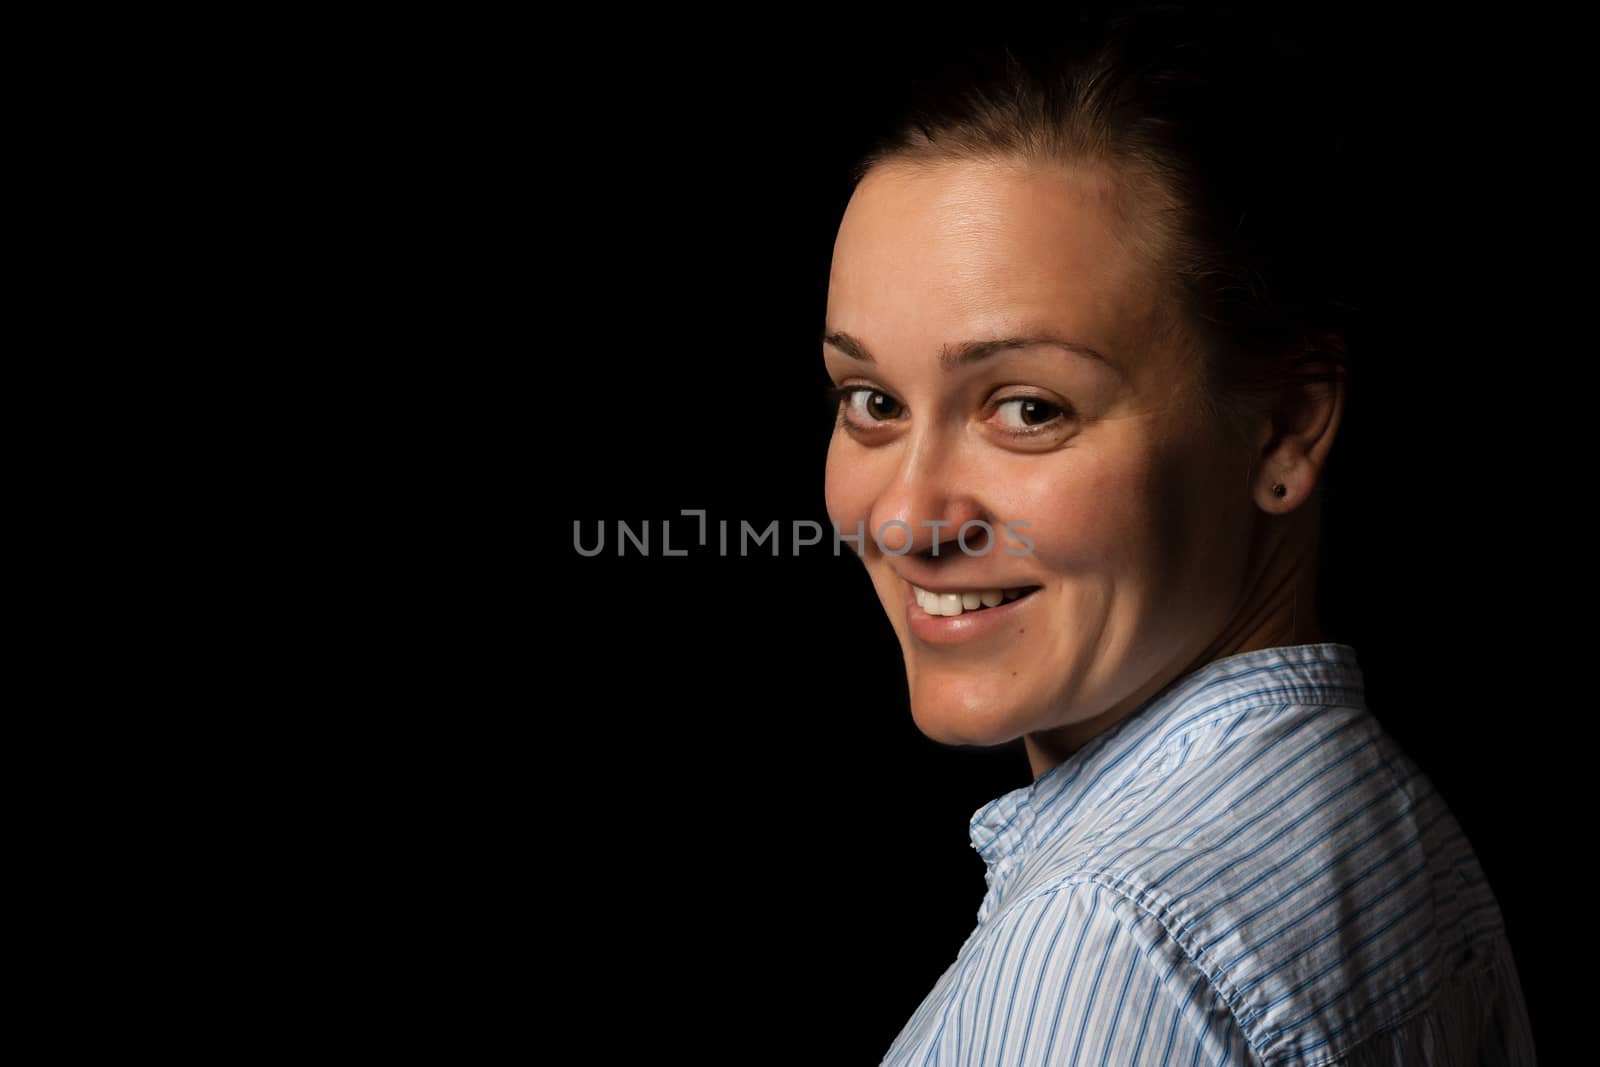 portrait of a smiling woman on dark background